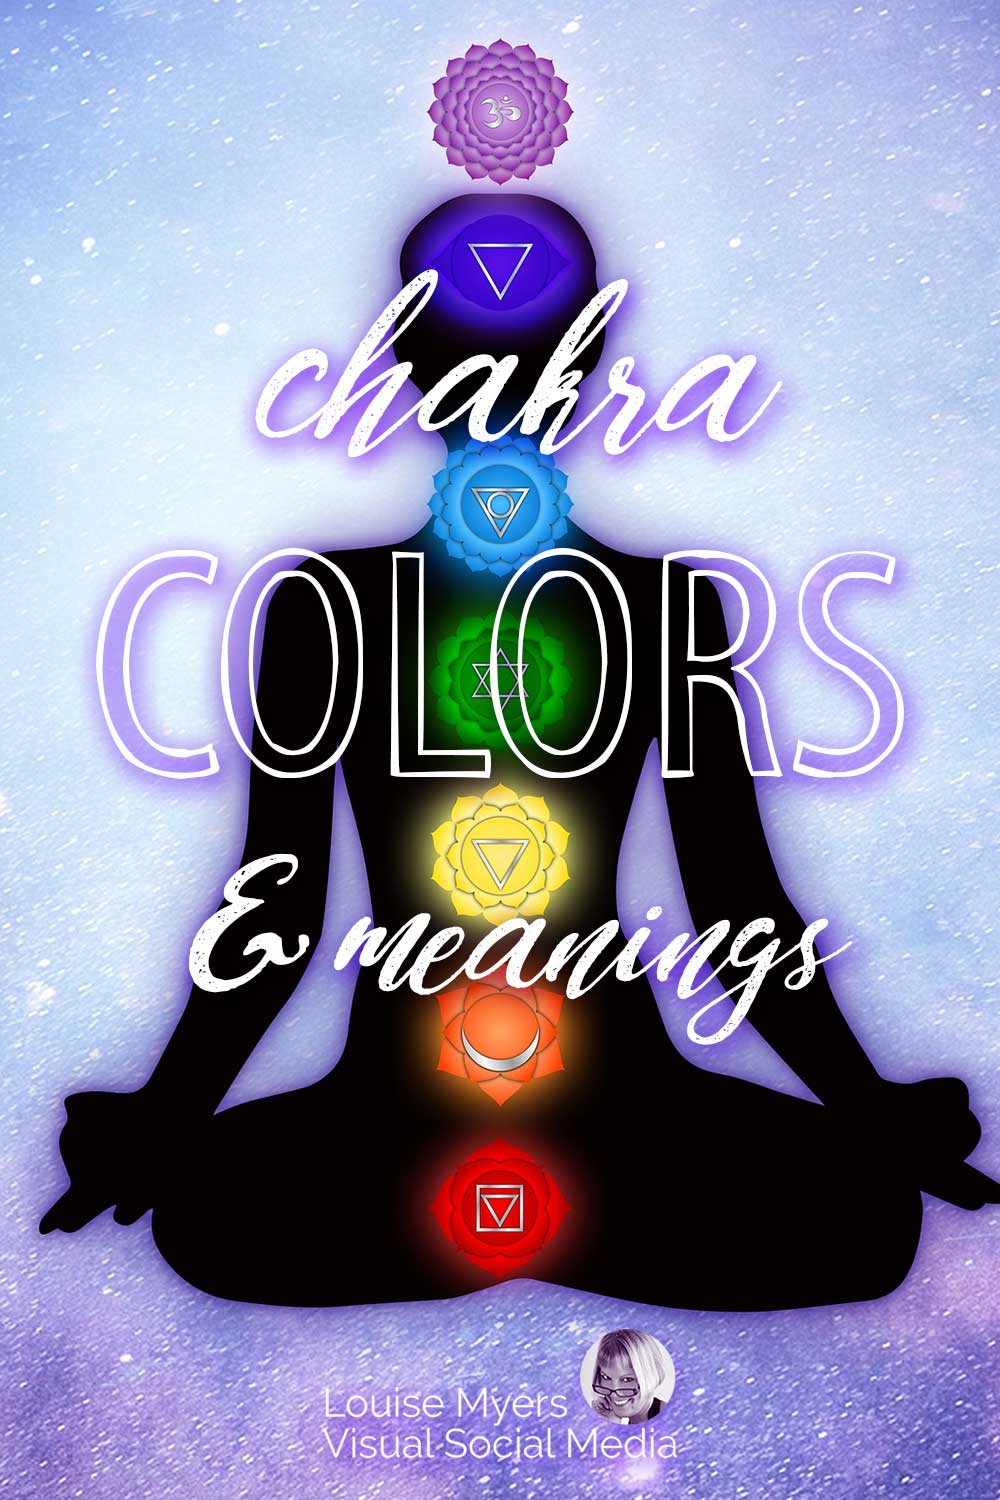 7 colored chakras on black silhouette seated in lotus position says chakra colors and meanings.